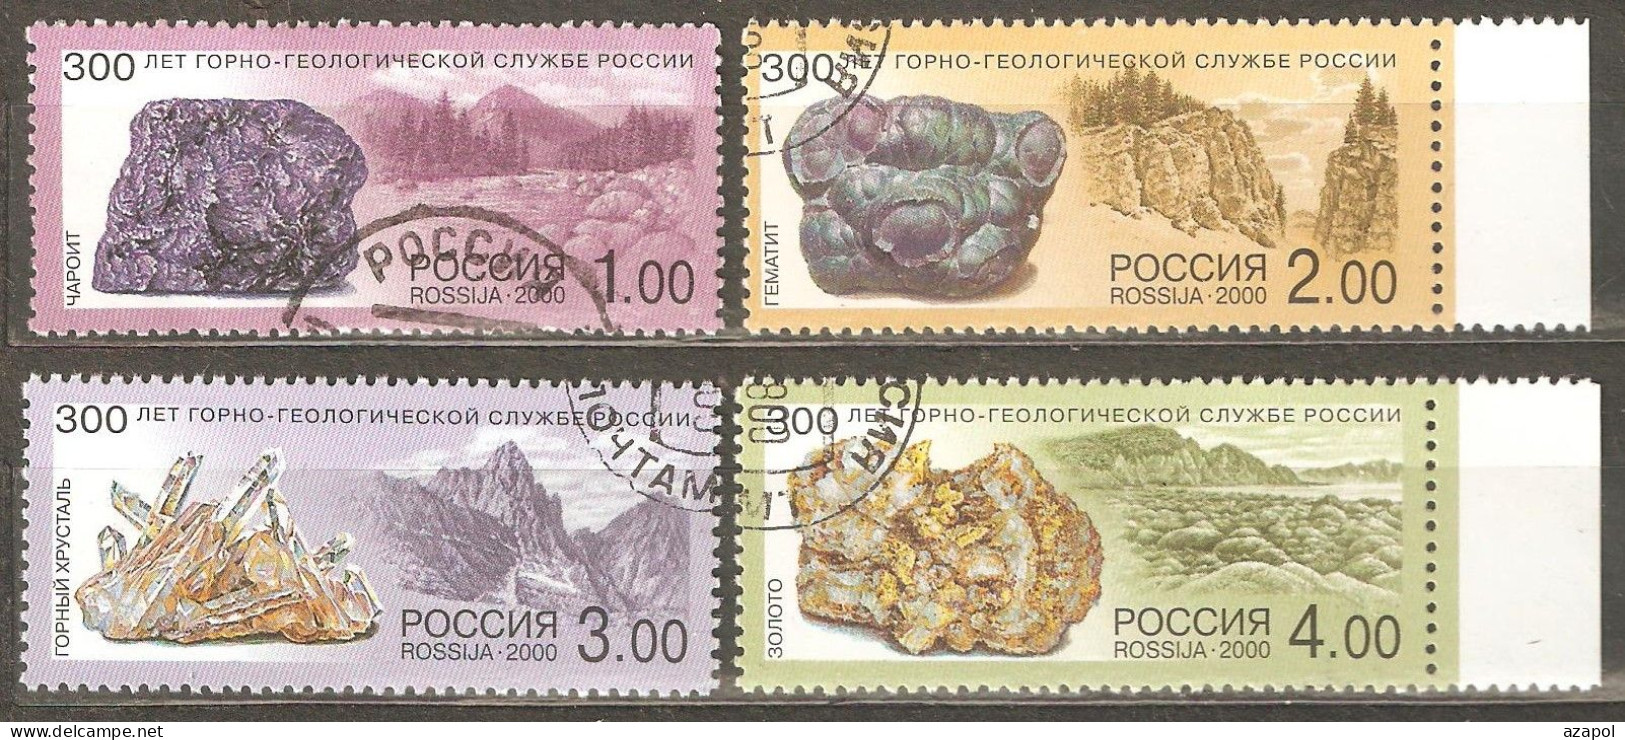 Russia: Full Set Of 4 Used Stamps, 300 Years Of Rock-Geological Service, 2000, Mi#845-8 - Usados